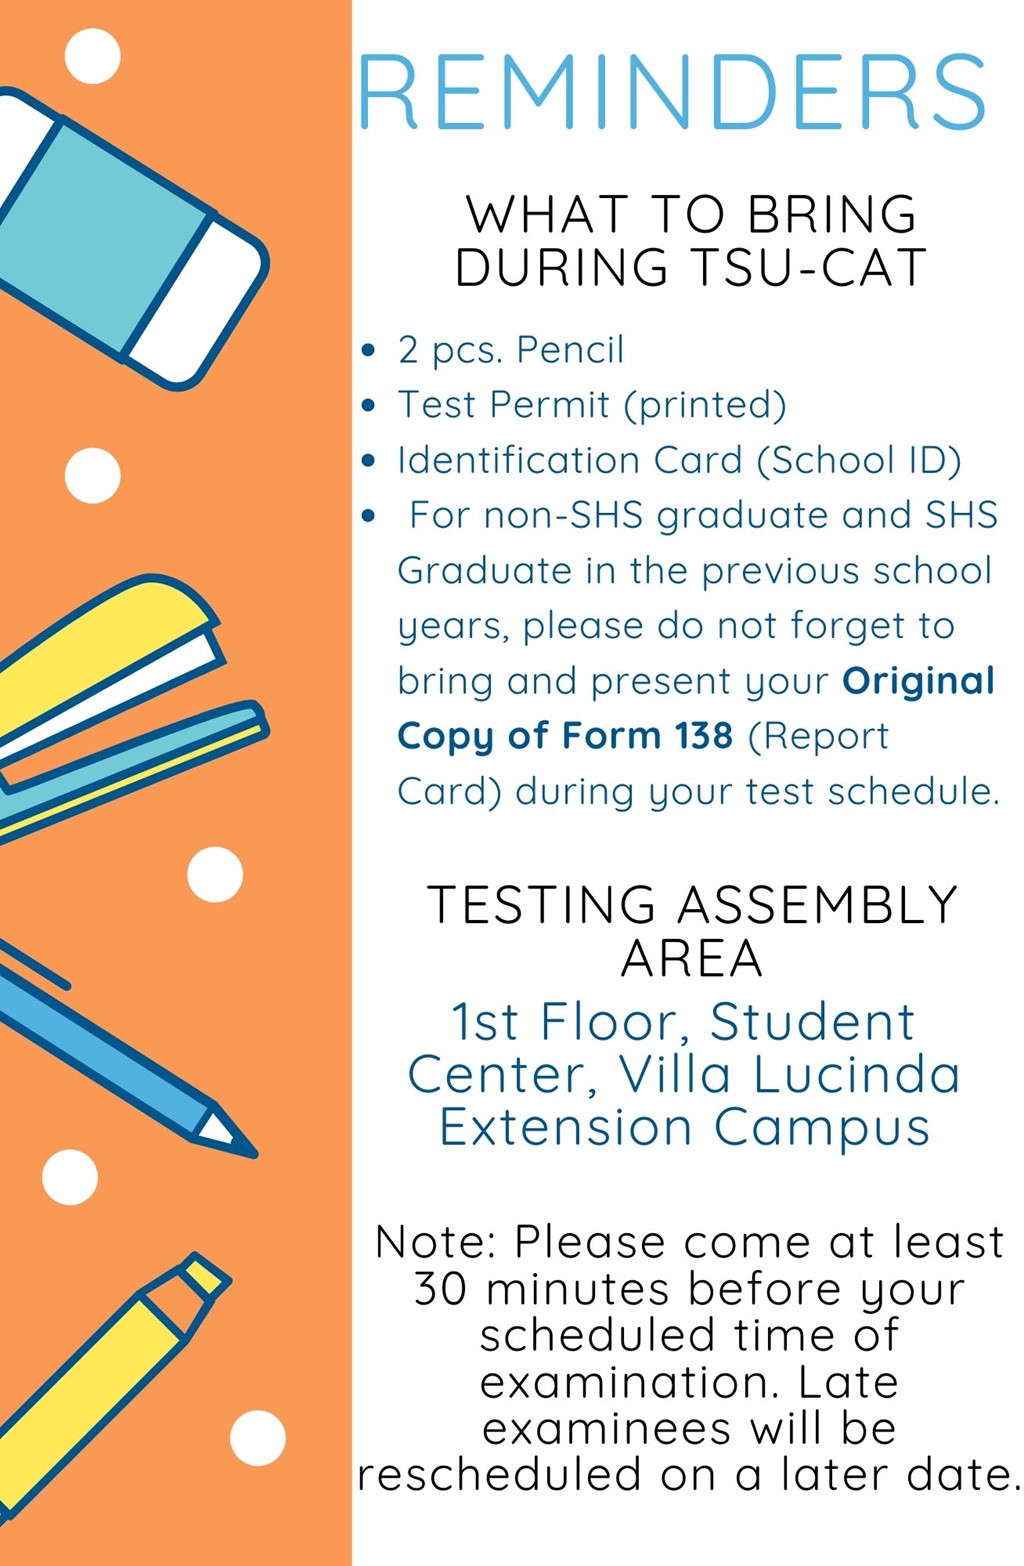 Reminders from TSU Testing, Evaluation and Monitoring Unit for TSUCAT